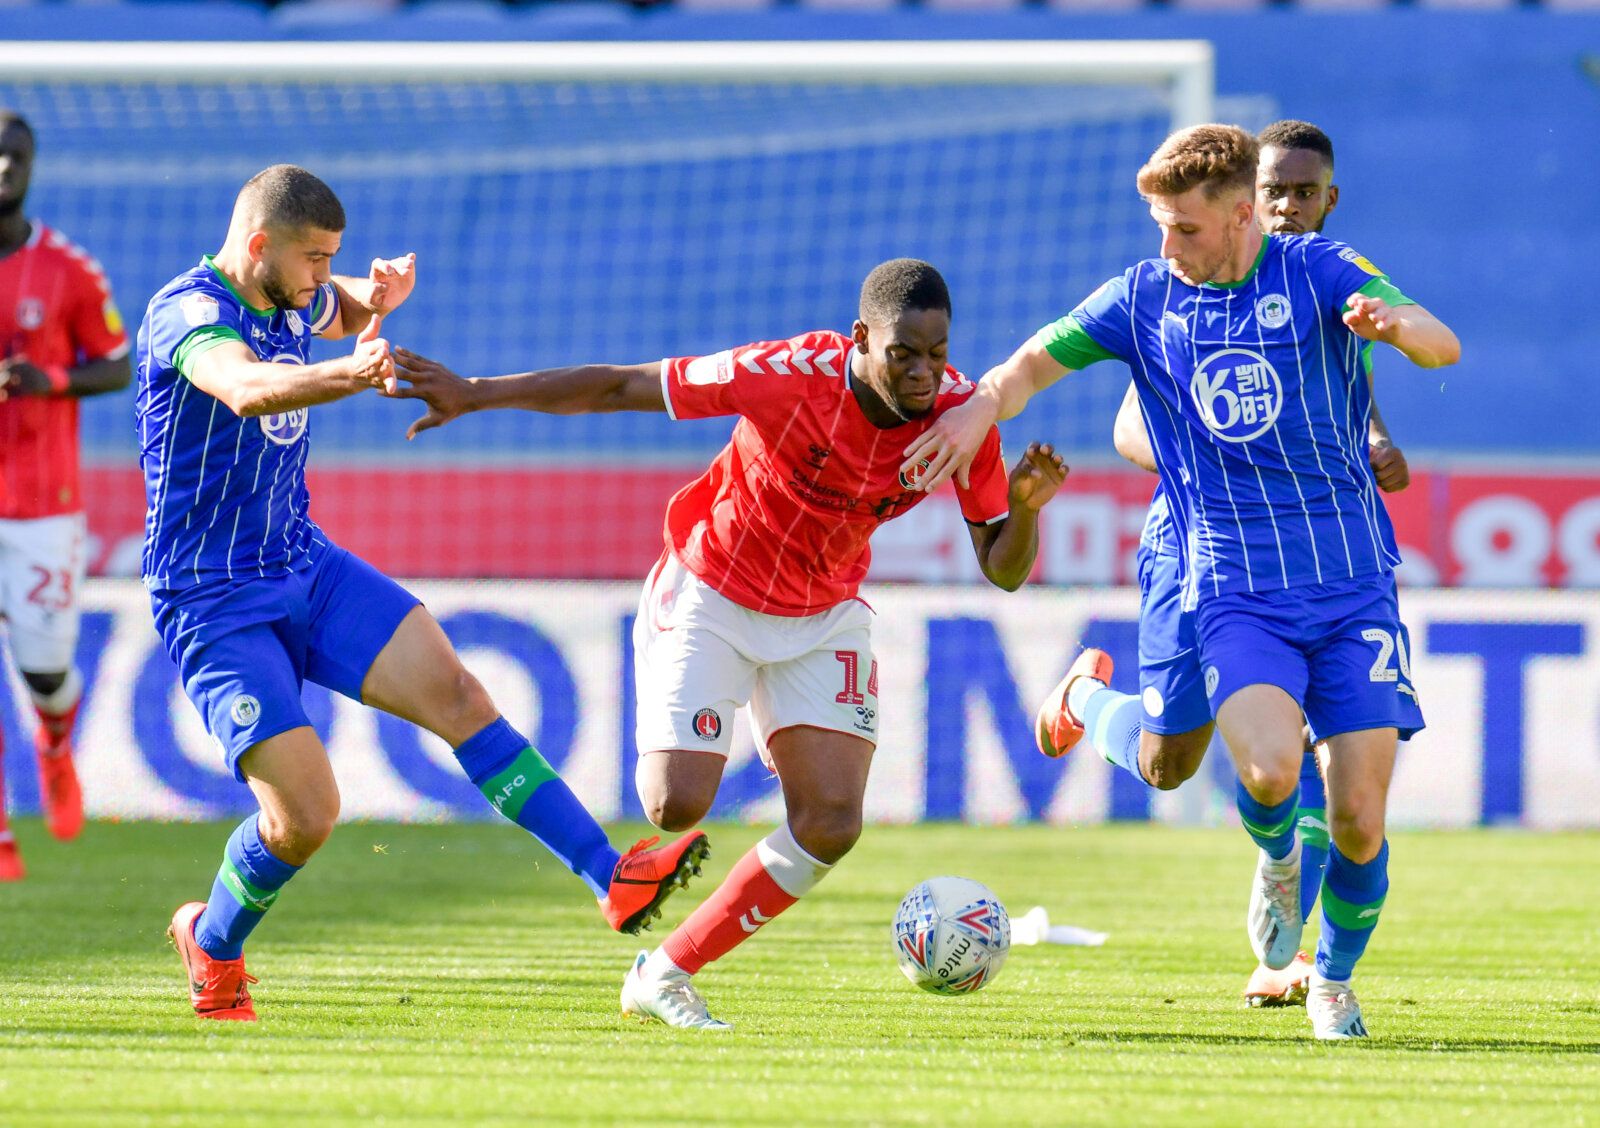 Soccer Football - Championship - Wigan Athletic v Charlton Athletic - DW Stadium, Wigan, Britain - September 21, 2019   Charlton Athletic's Jonathan Leko in action with Wigan Athletic's Sam Morsy and Joe Williams   Action Images/Paul Burrows    EDITORIAL USE ONLY. No use with unauthorized audio, video, data, fixture lists, club/league logos or 